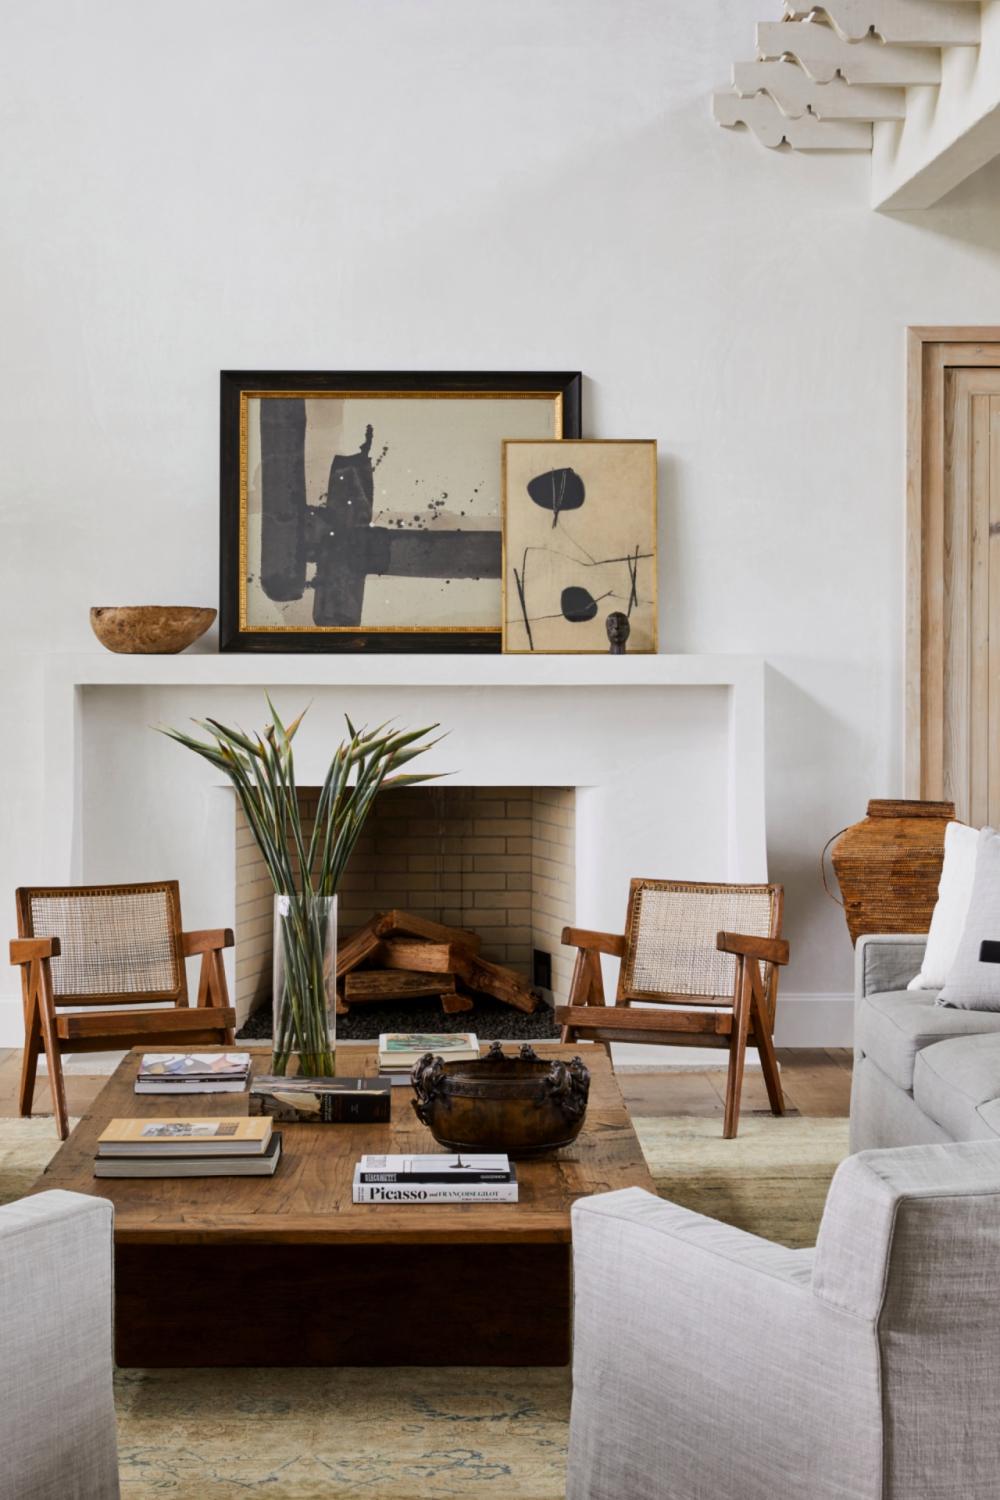 34 chic ways to style mantelpieces, from the world’s most stylish homes-1.jpg